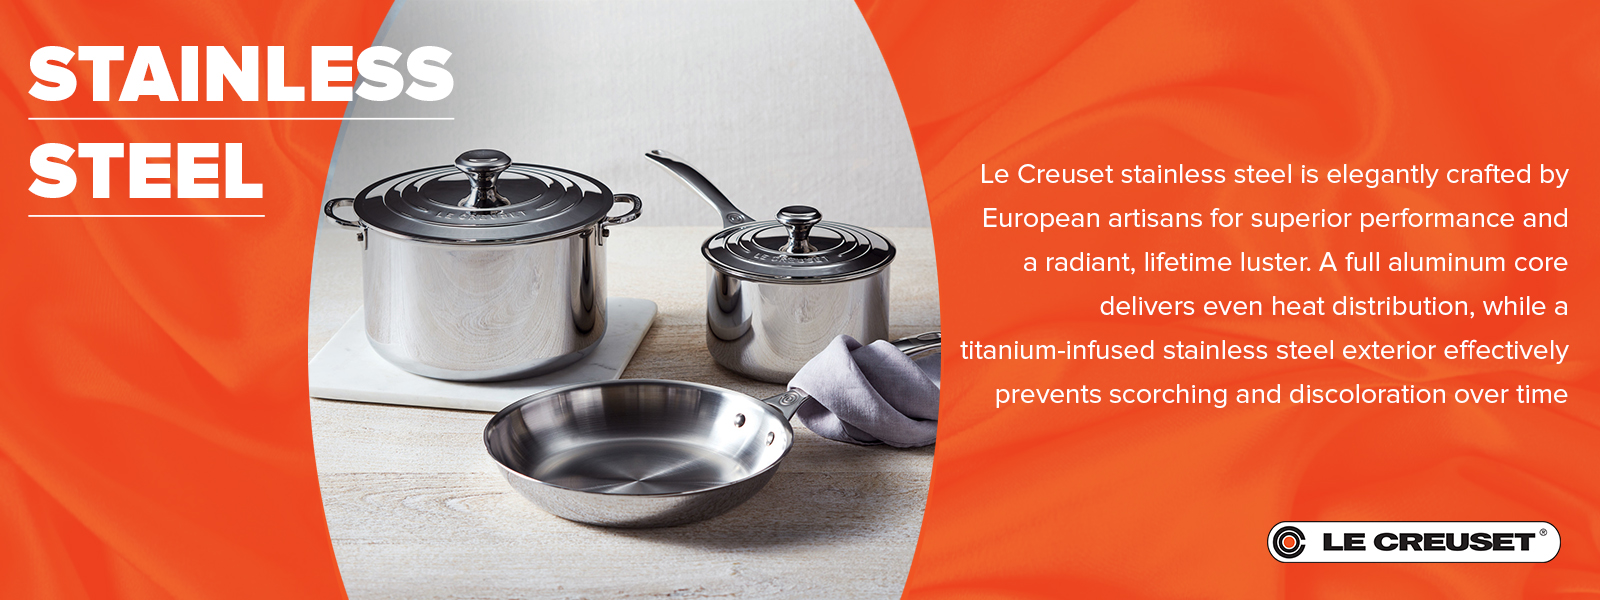 Le Creuset Stainless Steel